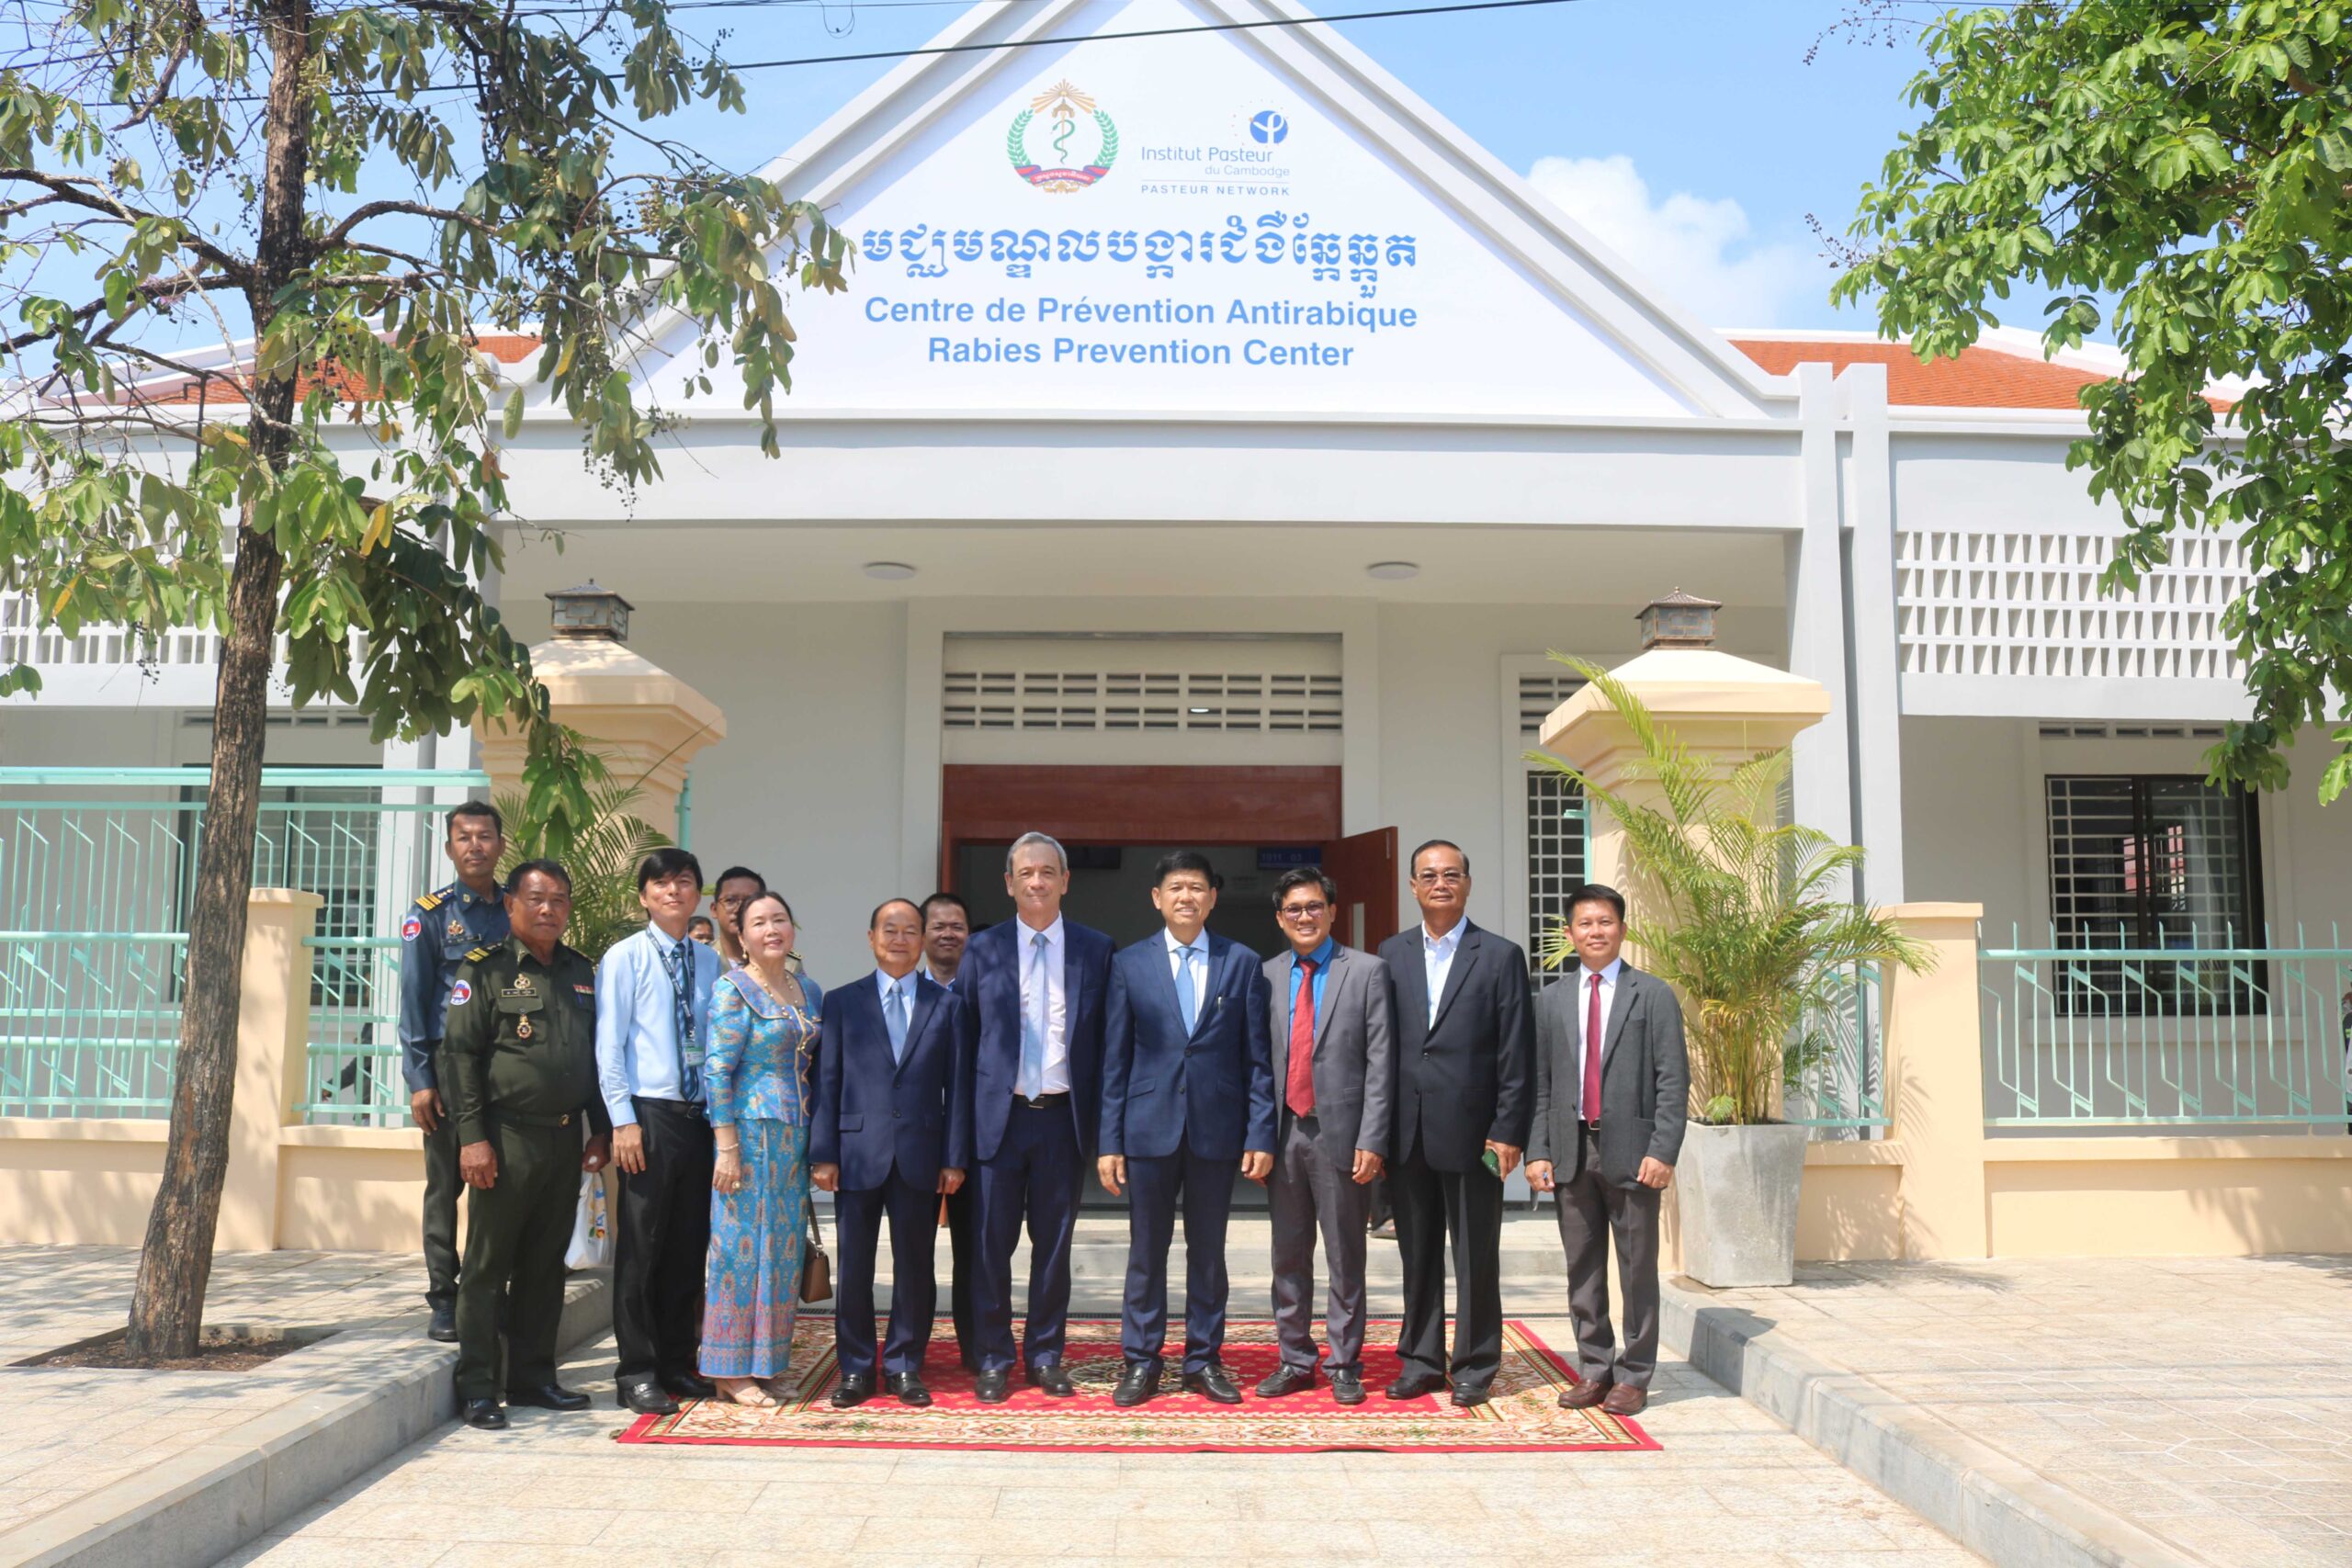 Inauguration of the new Rabies Prevention Center in Kampong Cham